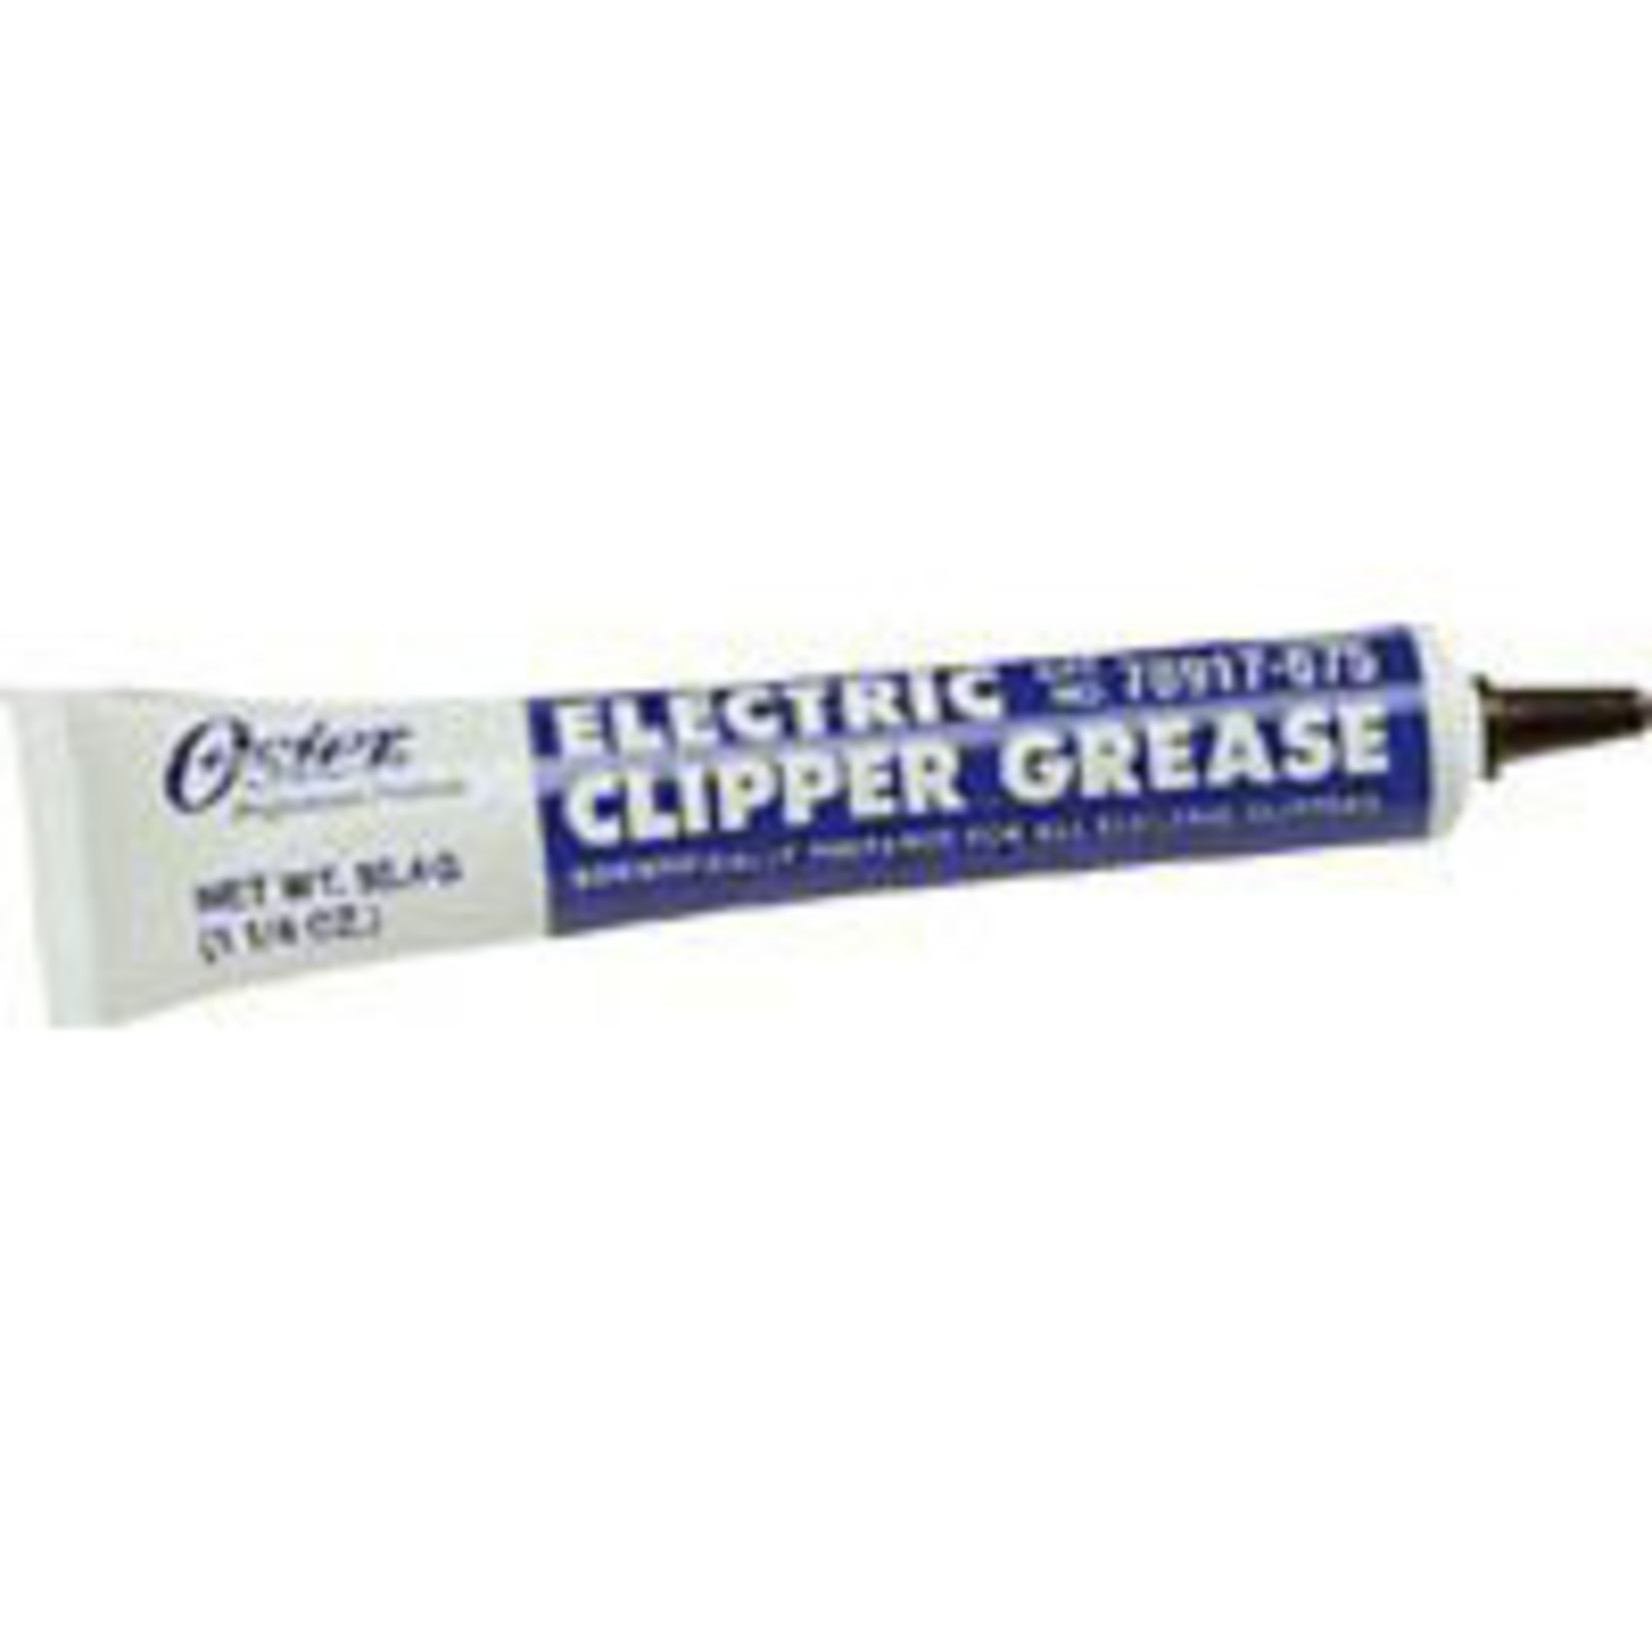 Oster Oster Clipper Grease 1.25oz